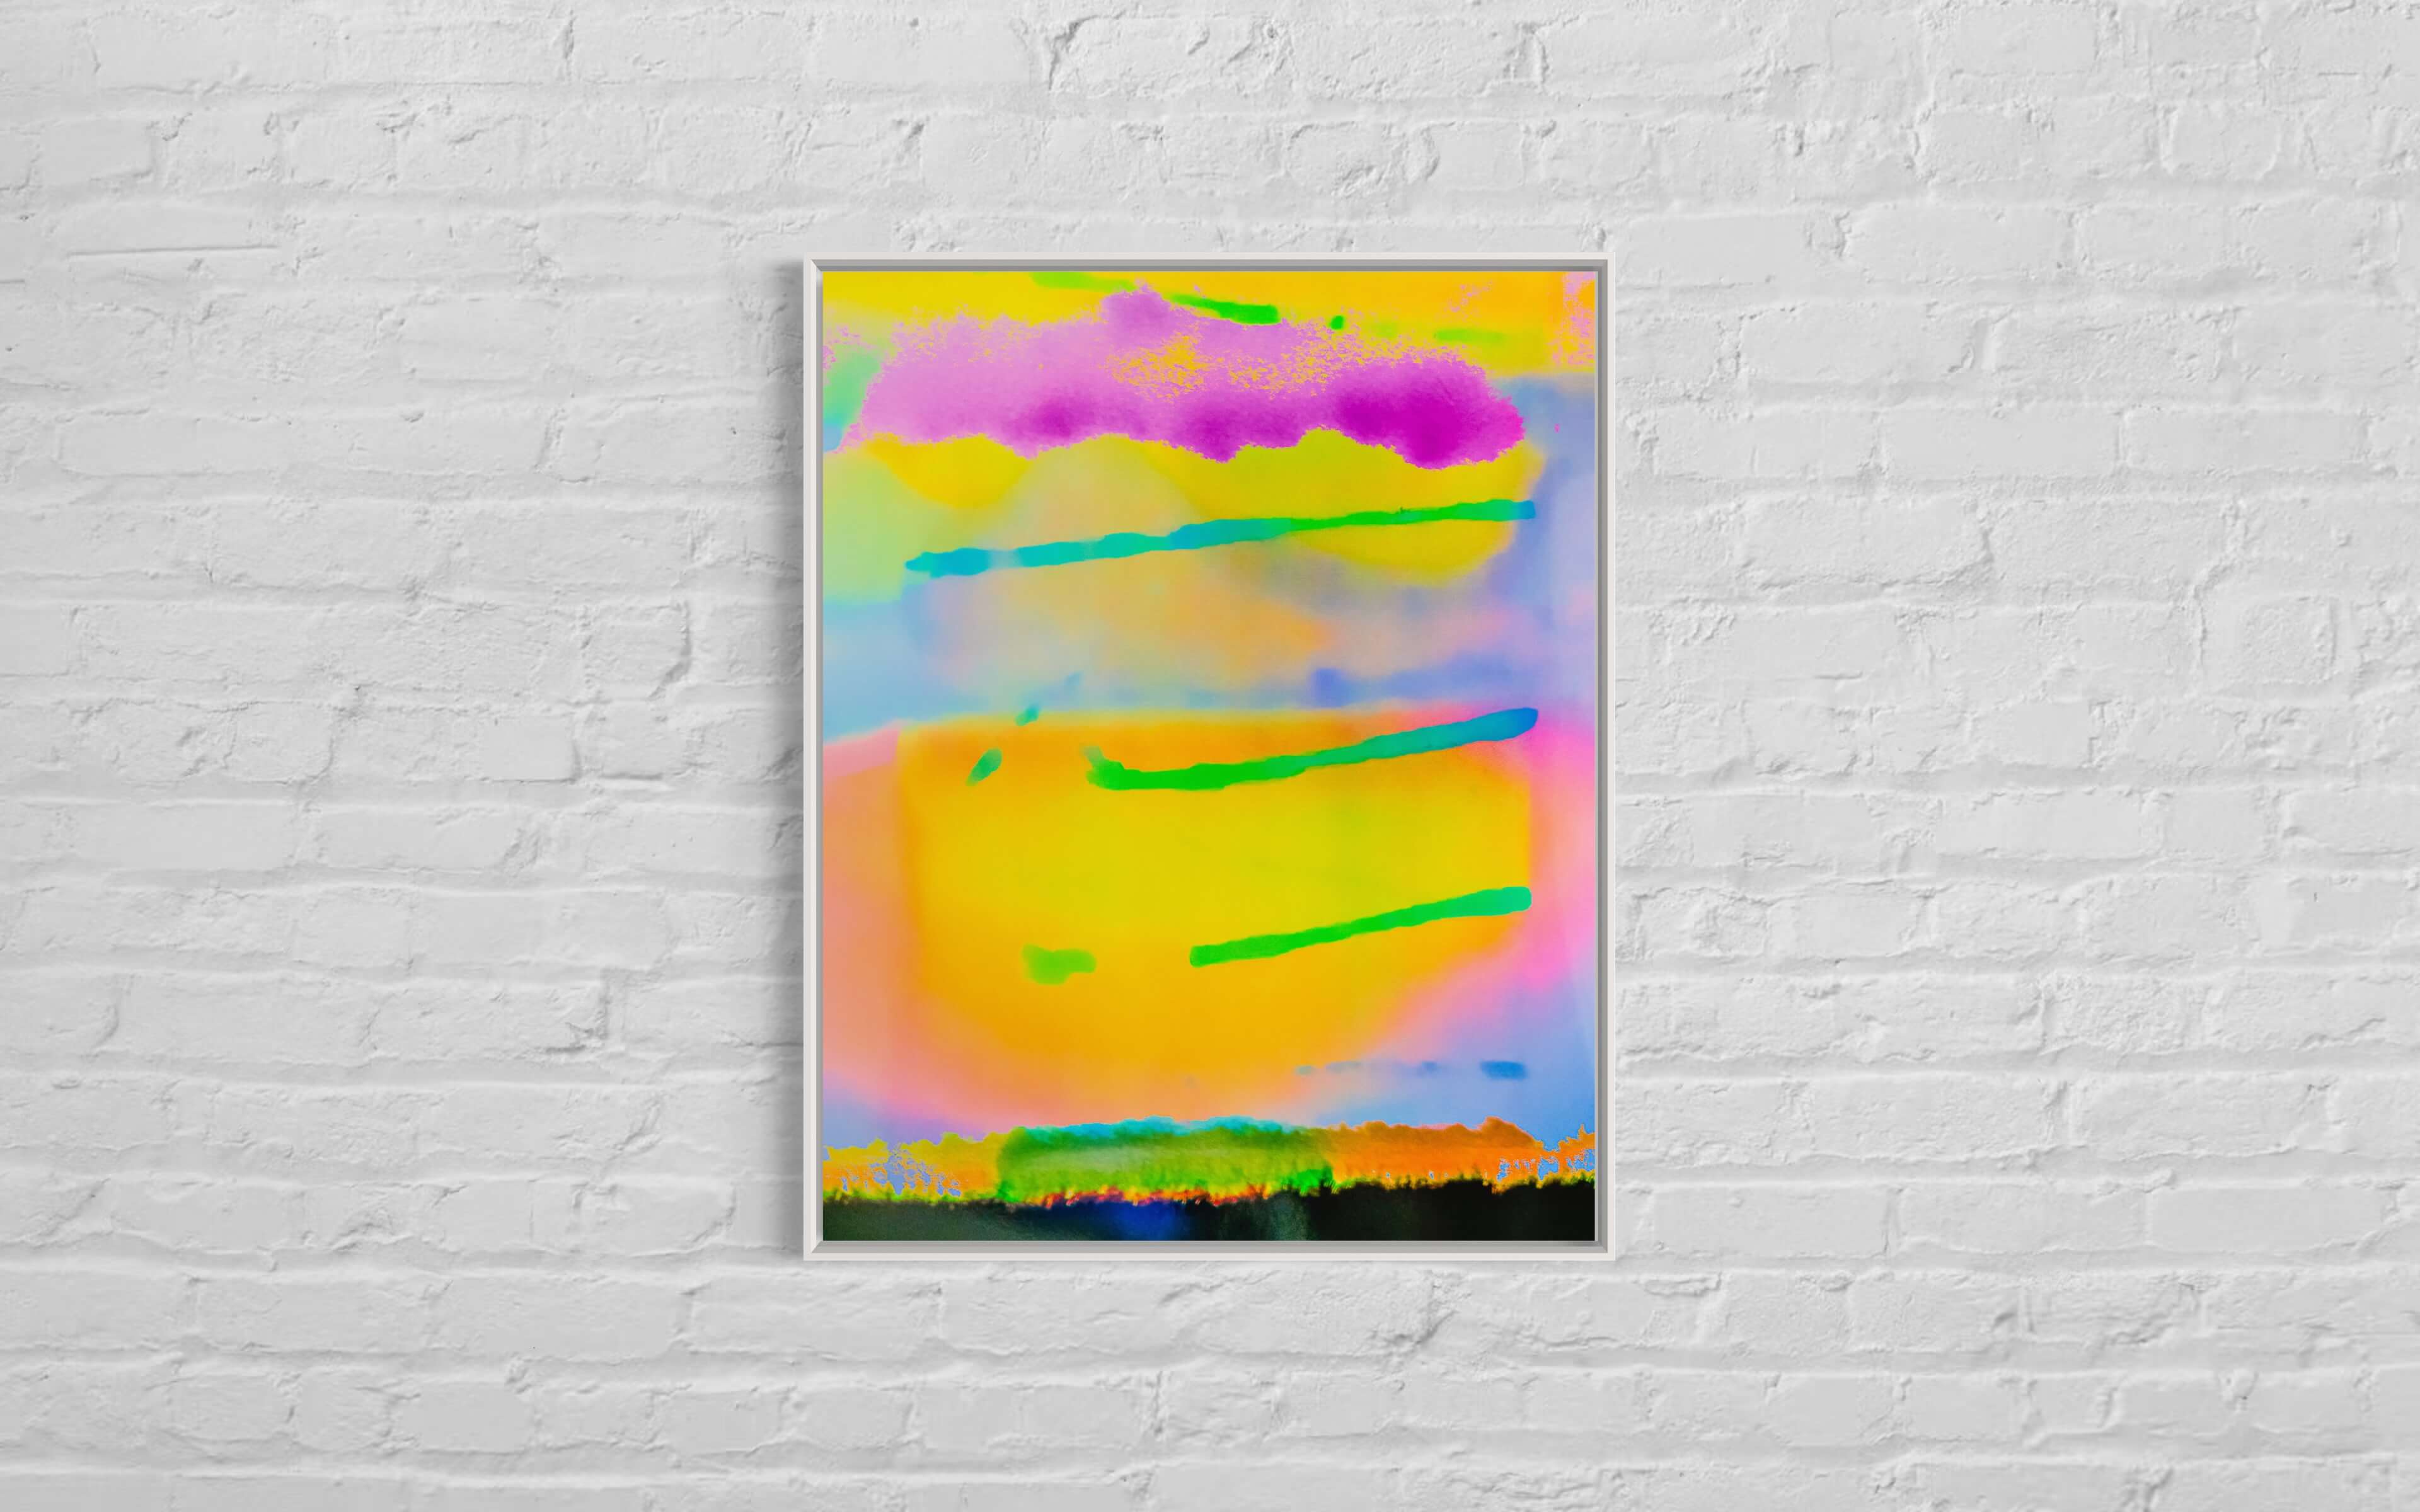 The image shows "Raising Energy !!," an artwork displayed on a white brick wall. It features bold, luminous colours—vivid pink at the top with streaks of yellow, green, and blue below, all set against a bright orange background. These colours seem to float on the canvas, creating a sense of energy and movement. The piece adds a splash of colour and emotion to the otherwise stark setting.